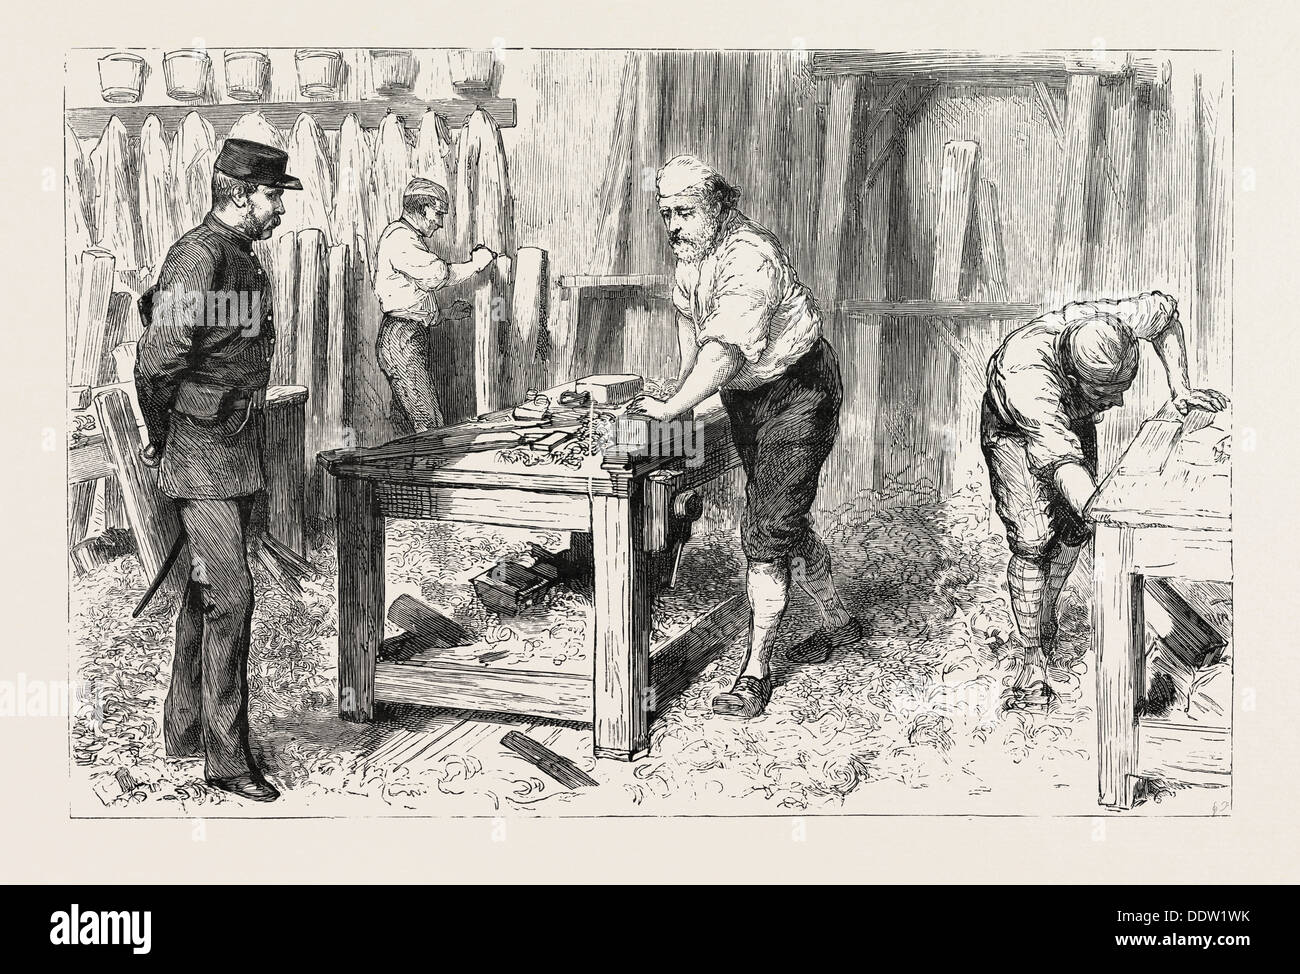 THE CLAIMANT AT WORK IN THE CARPENTERS SHOP,  PORTSMOUTH CONVICT PRISON, ENGRAVING 1884, UK, britain, british, europe Stock Photo